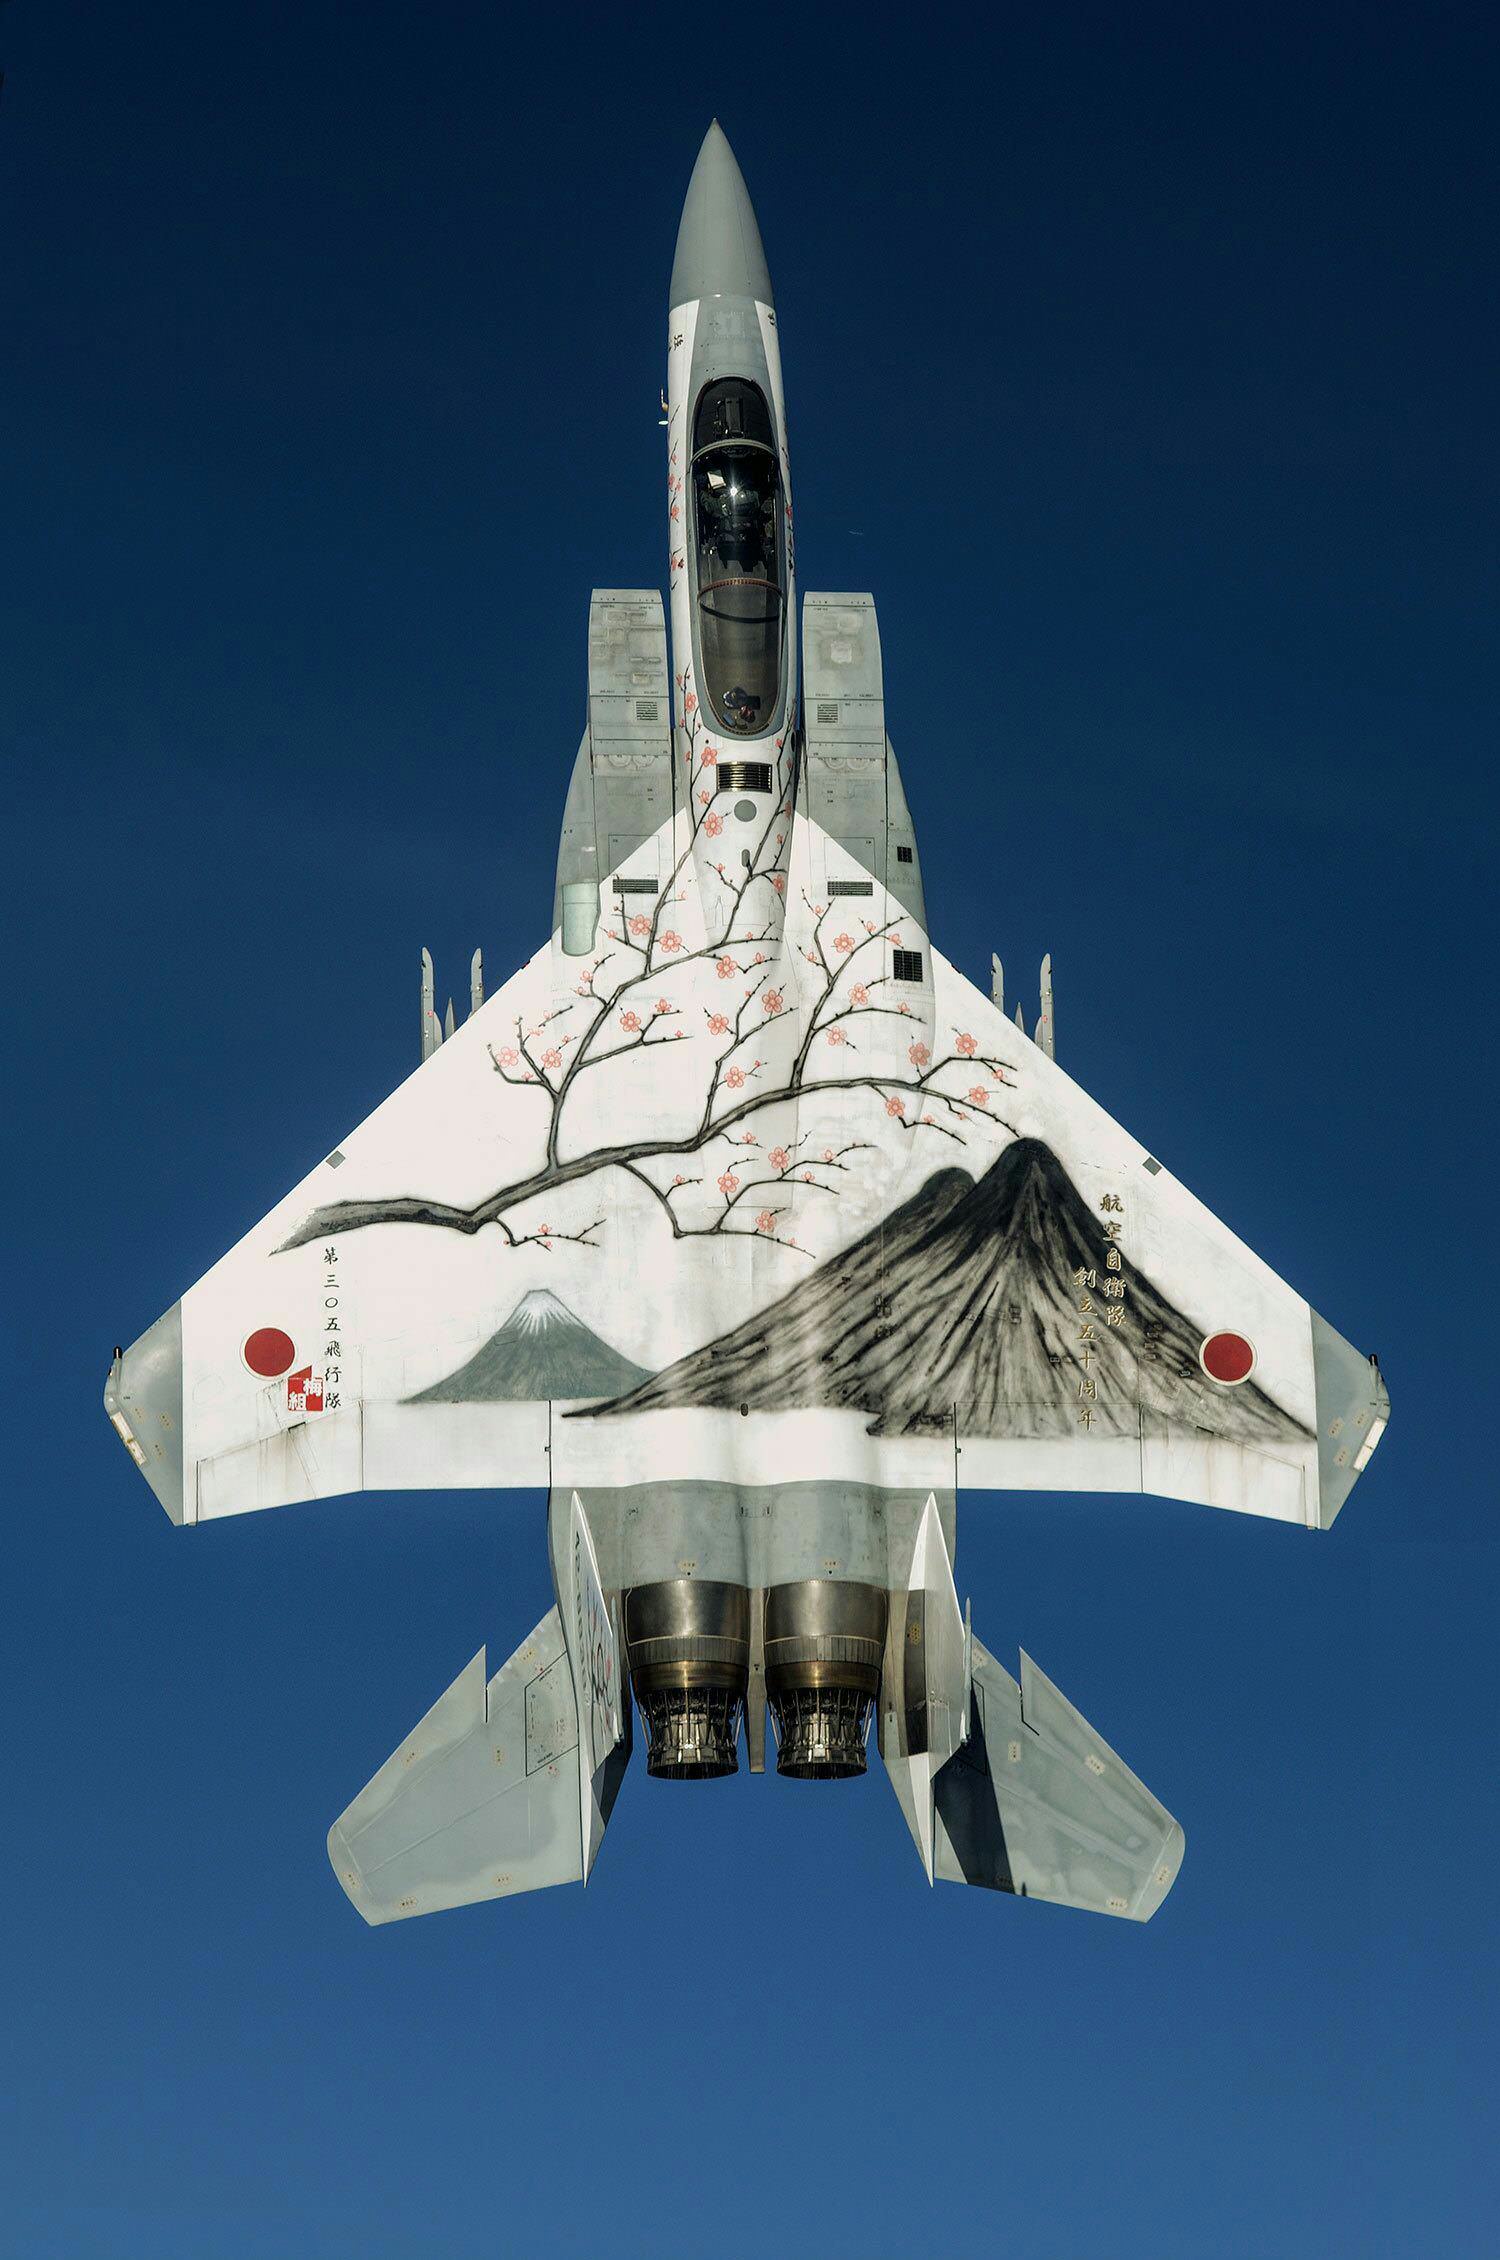 The Japanese Air Force would like to formally apologize for their paint jobs.